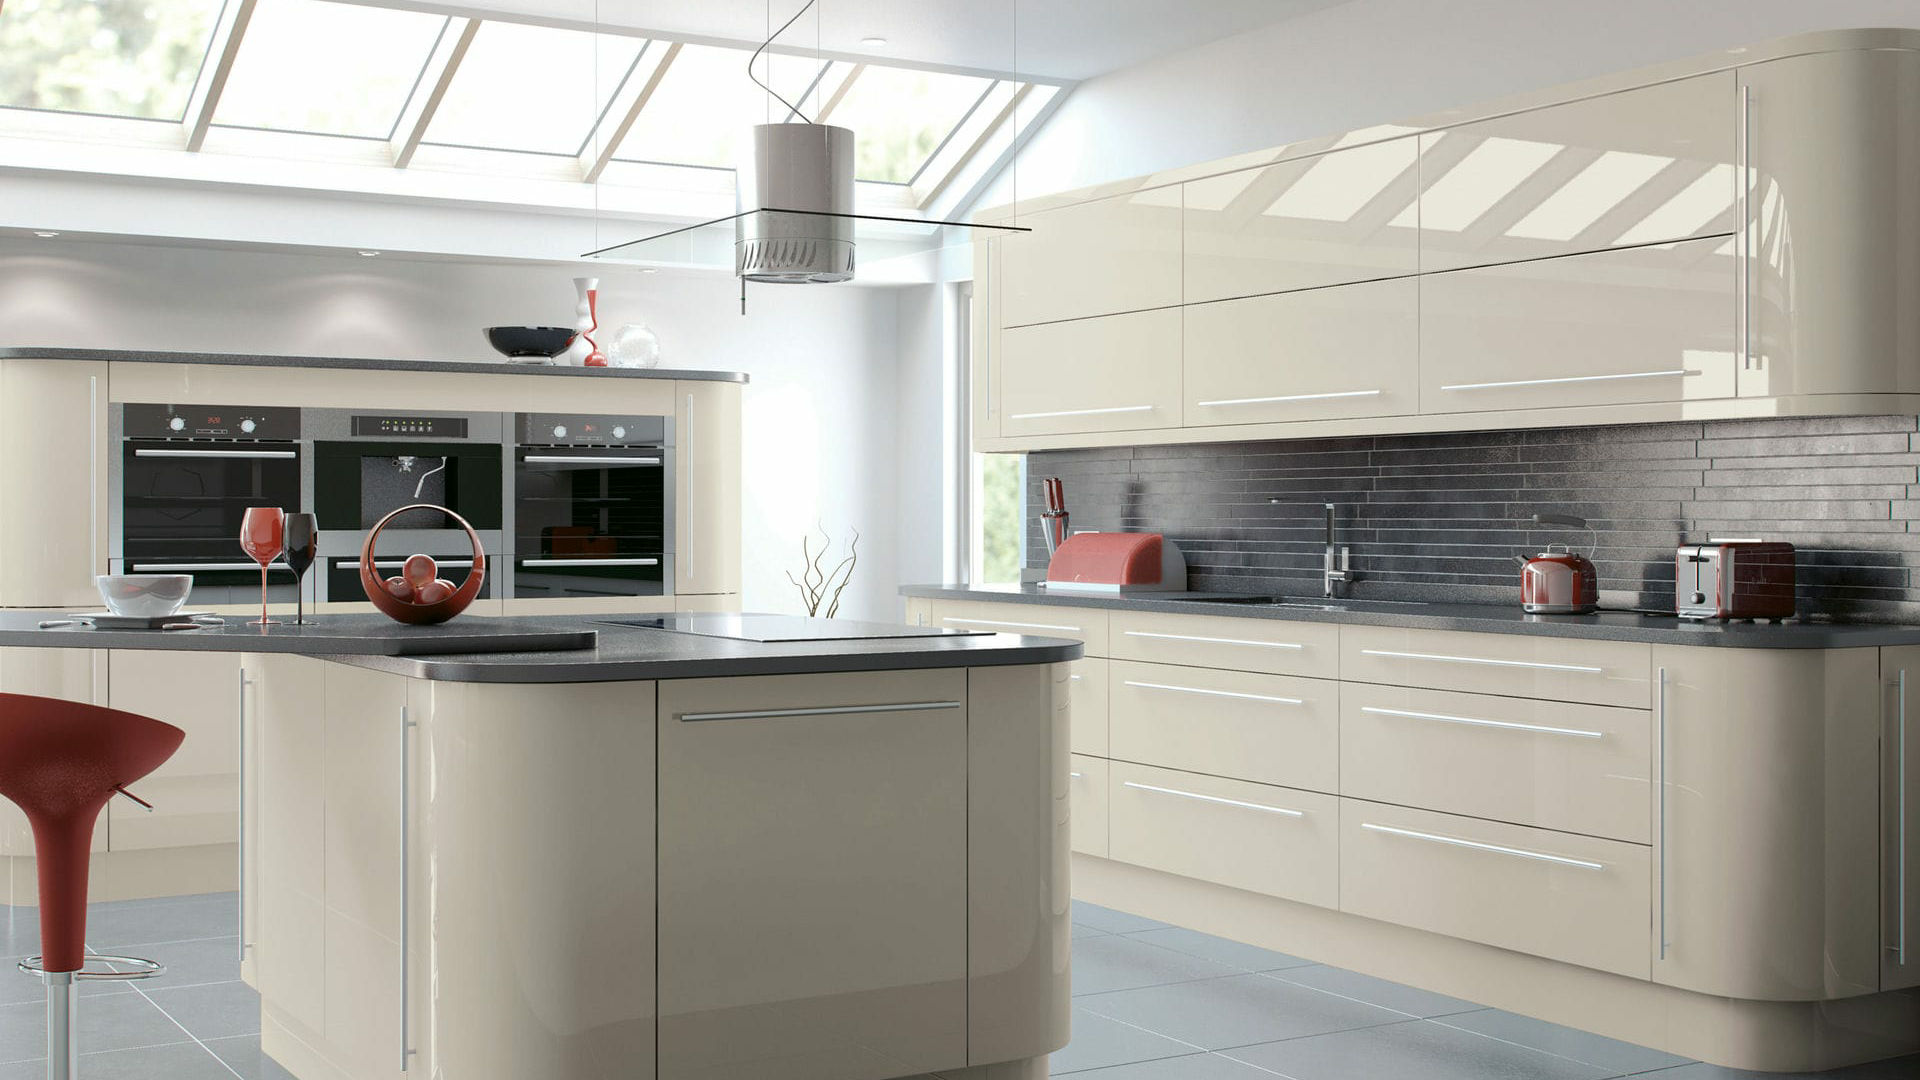 High Gloss Cashmere kitchen featuring a sleek, reflective surface for a luxurious and contemporary appeal